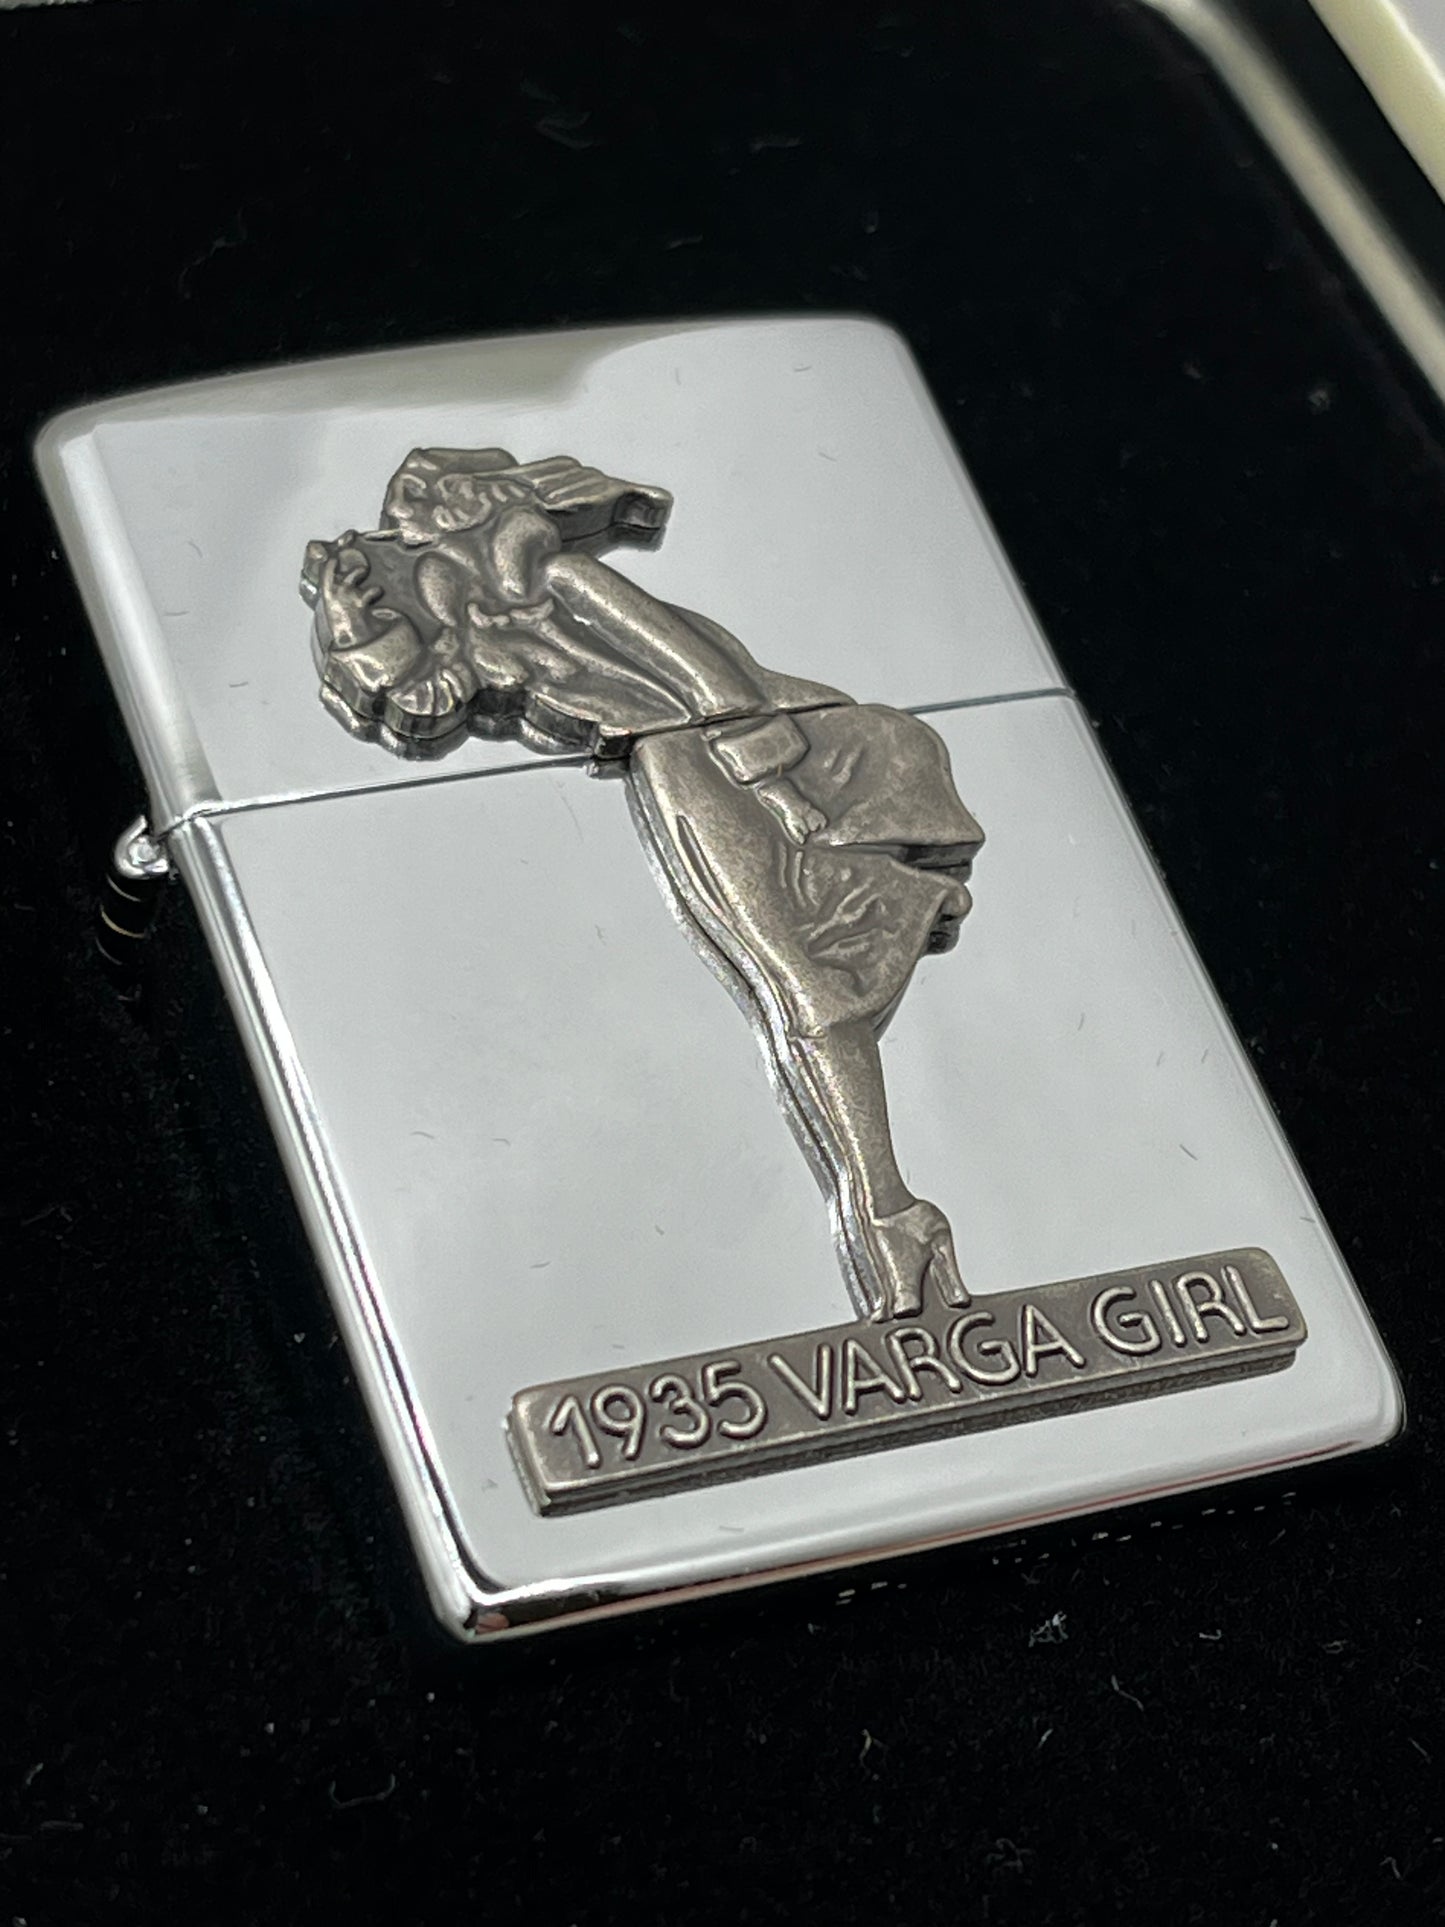 1993 Zippo The Varga Girl 1935 commemorative lighter with tin and 